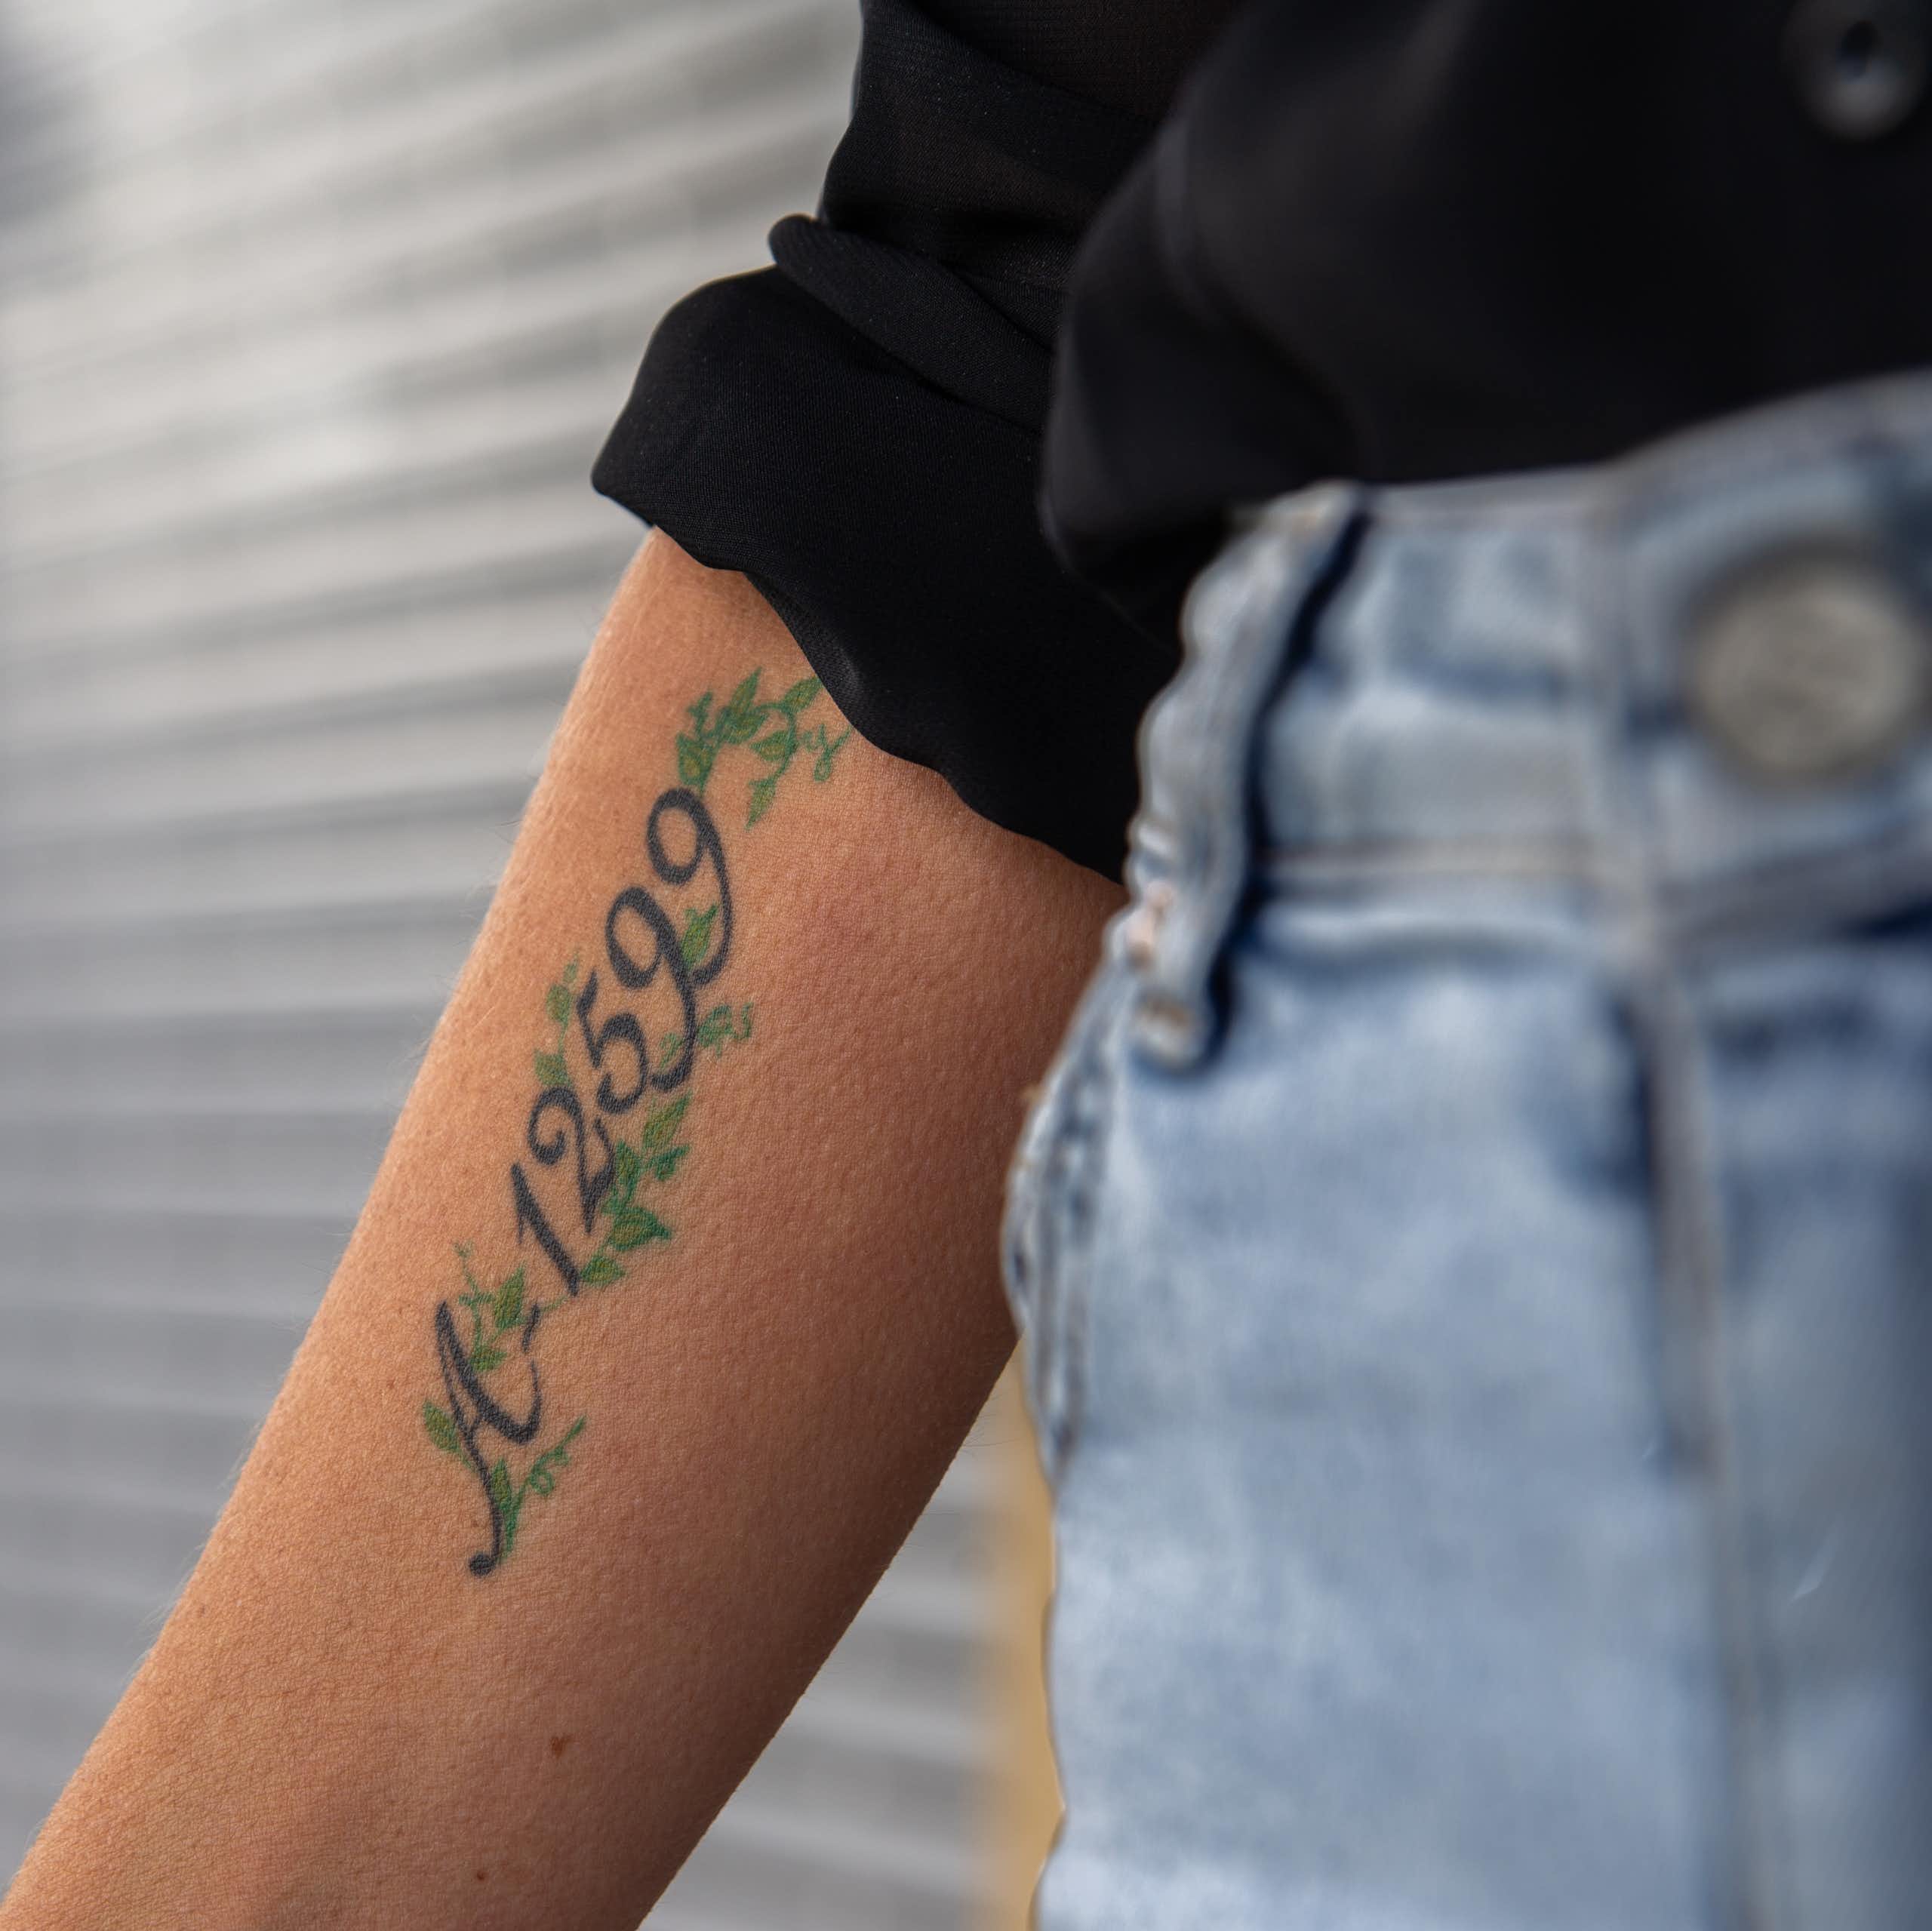 A woman wearing jeans and a black shirt holds out her arm on which is tattooed a number.